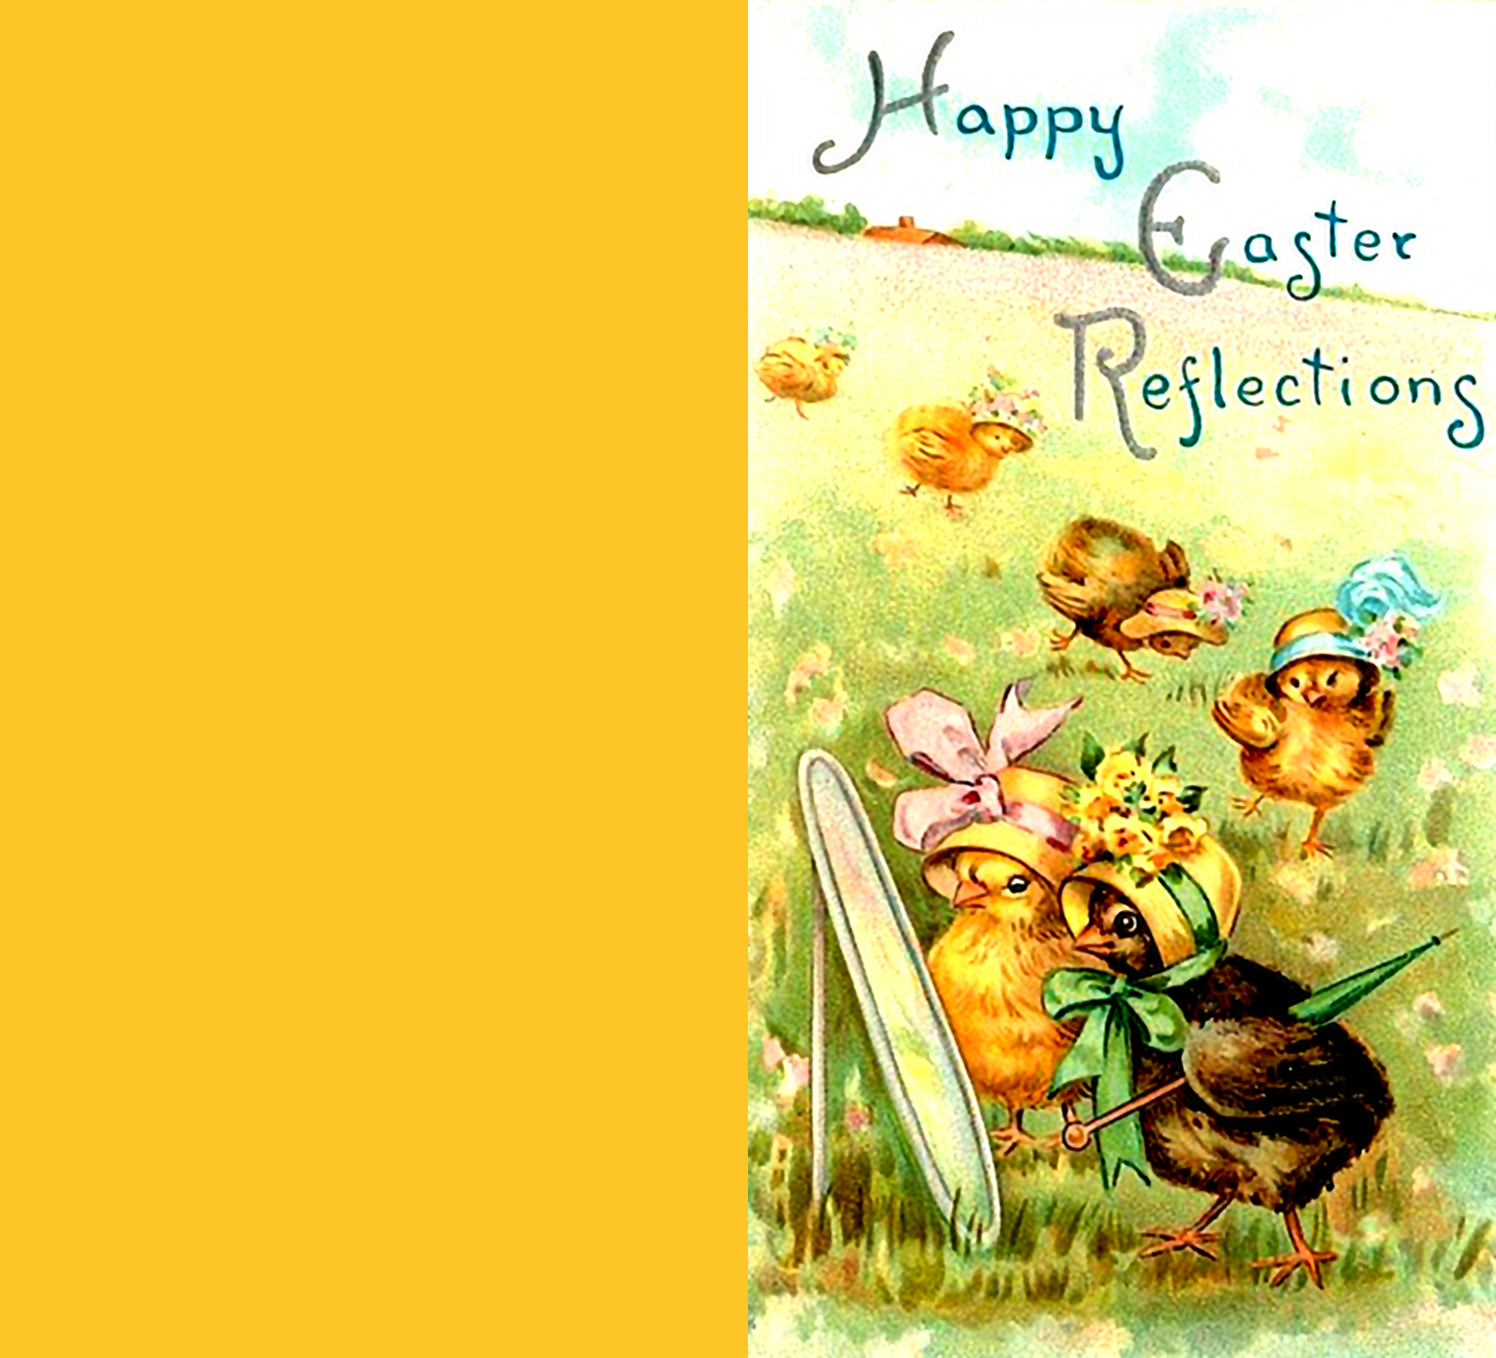 Wonderful vintage Easter greeting card with cute little chickens.